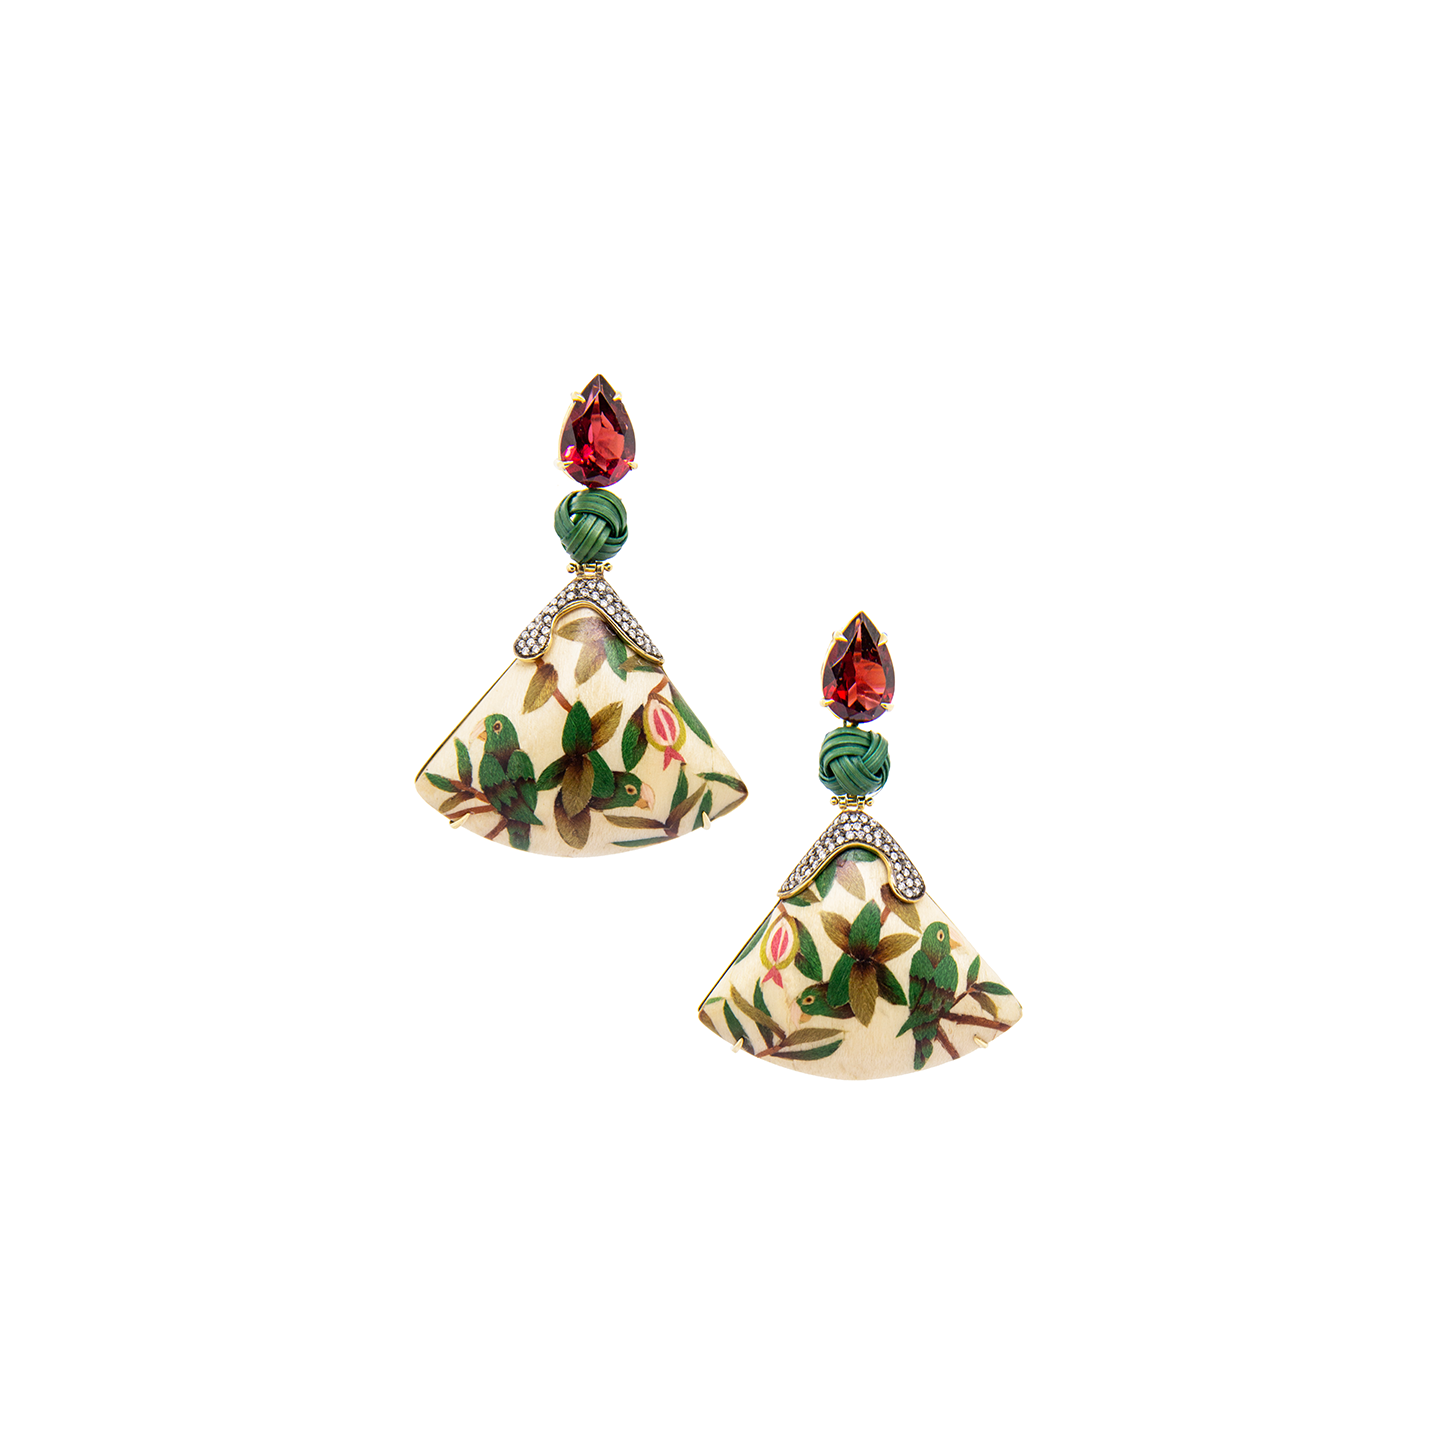 Moye Marquetry Earrings with Bamboo, Guava and Parrot Pattern